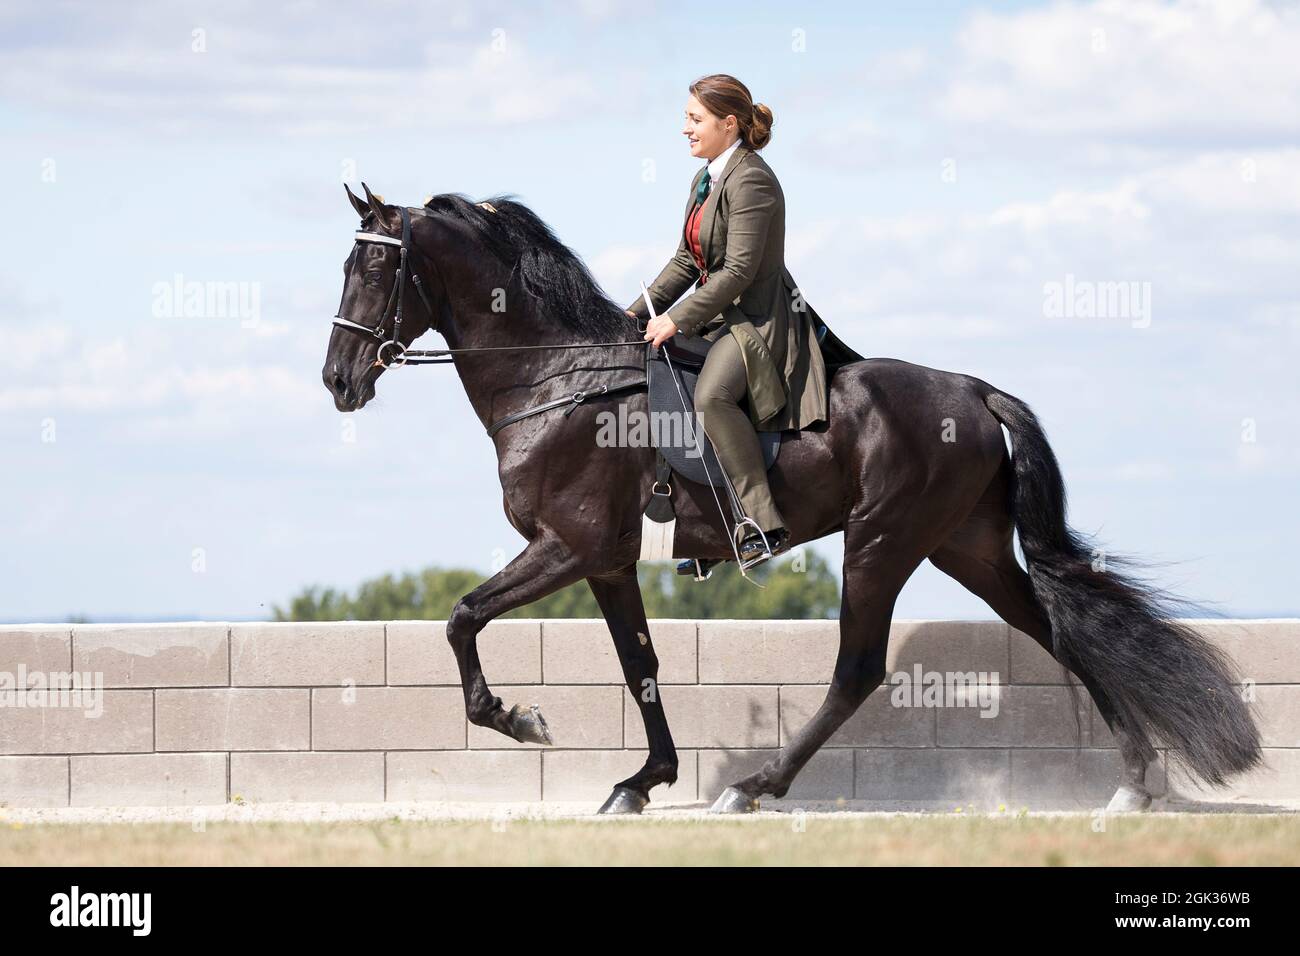 Tennessee Walking Horse. A rider on a black stallion performing a Running Walk. Germany Stock Photo